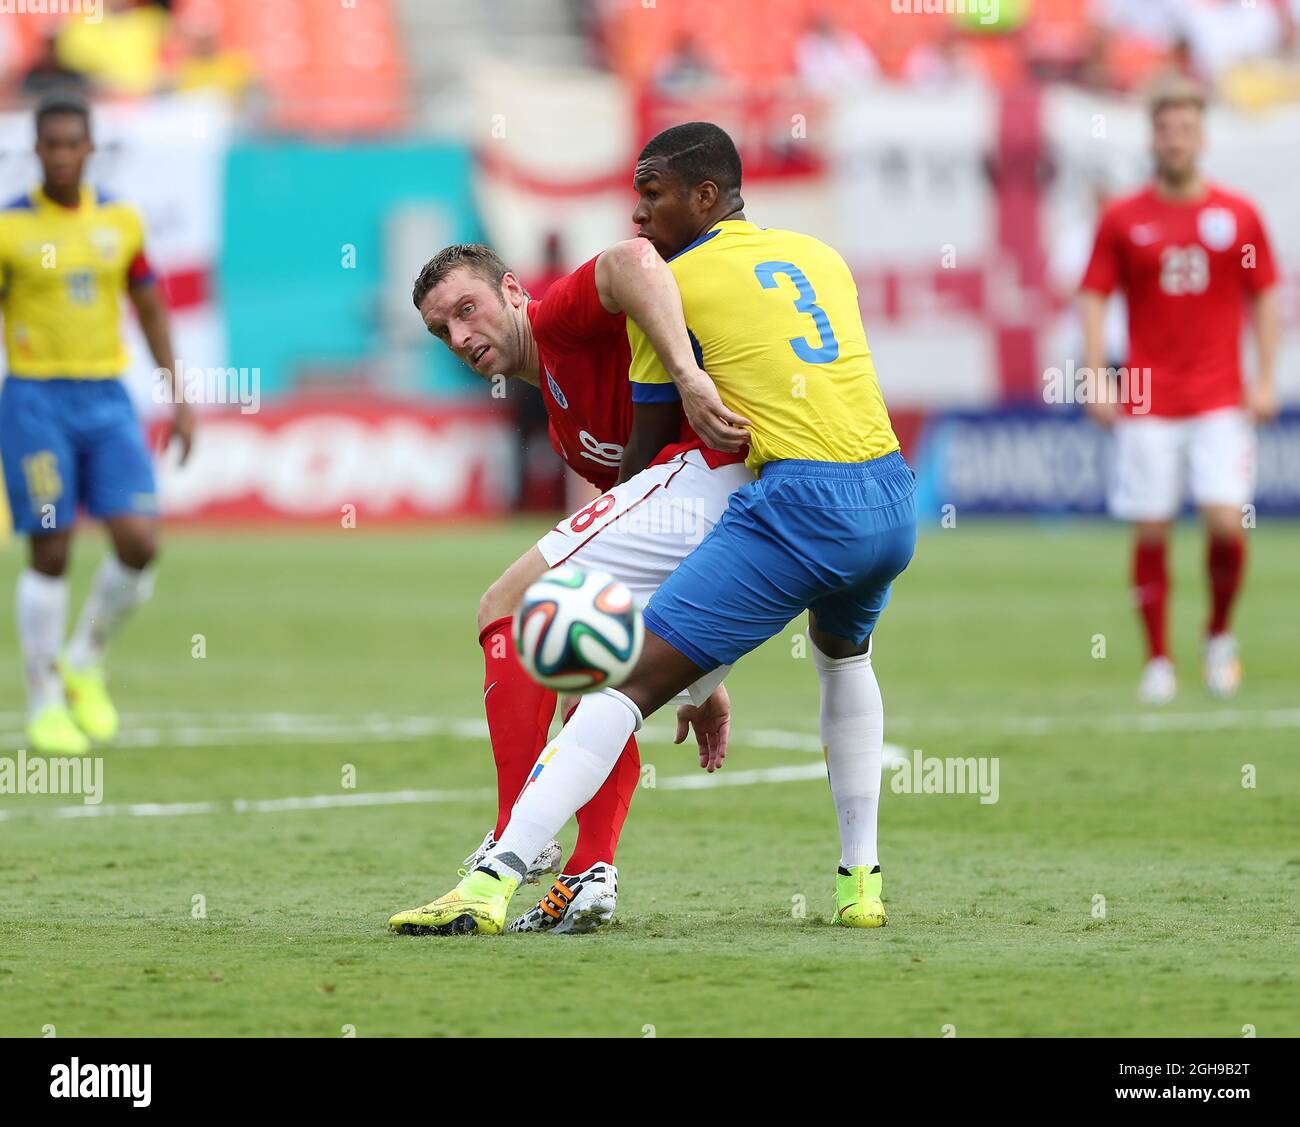 England's Rickie Lambert tussles with Ecuador's Frickson Erazo during the International Friendly match between England and Ecuador held at Sun Life Stadium in Miami, USA on June 4, 2014. Pic David Klein/Sportimage. Stock Photo